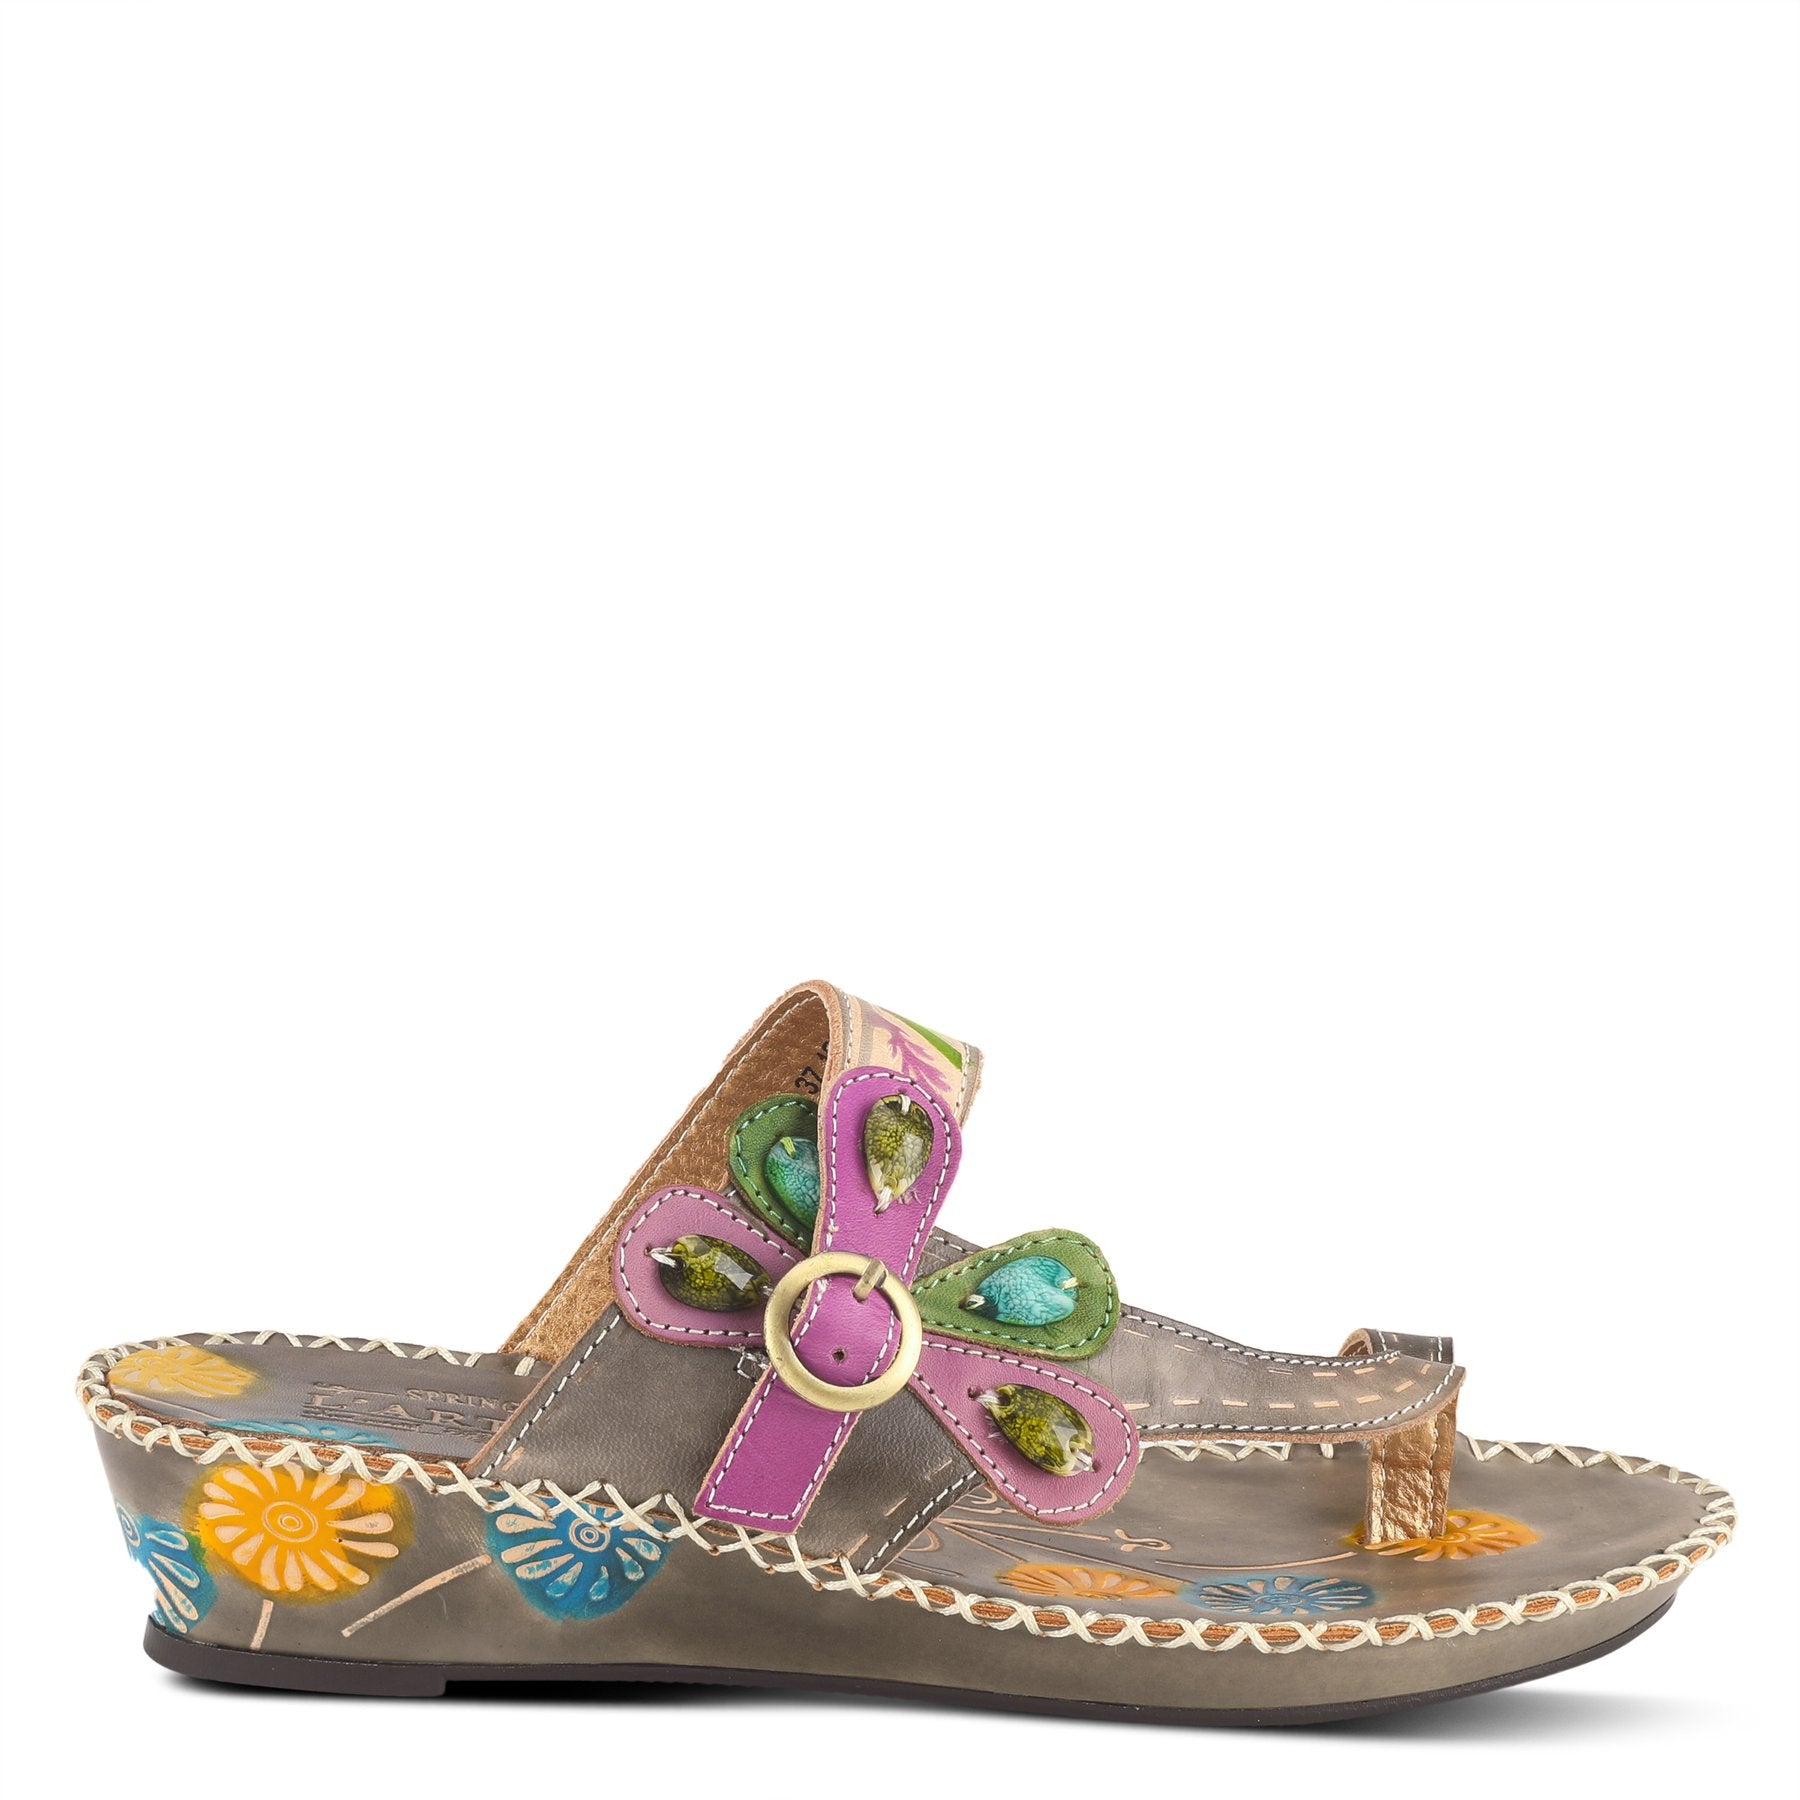 Outer side of the l'artiste santorini slide sandal. This sandal is grey with colorful flowers painted all over the sole, a toe-ring thong, and an adjustable buckle strap.